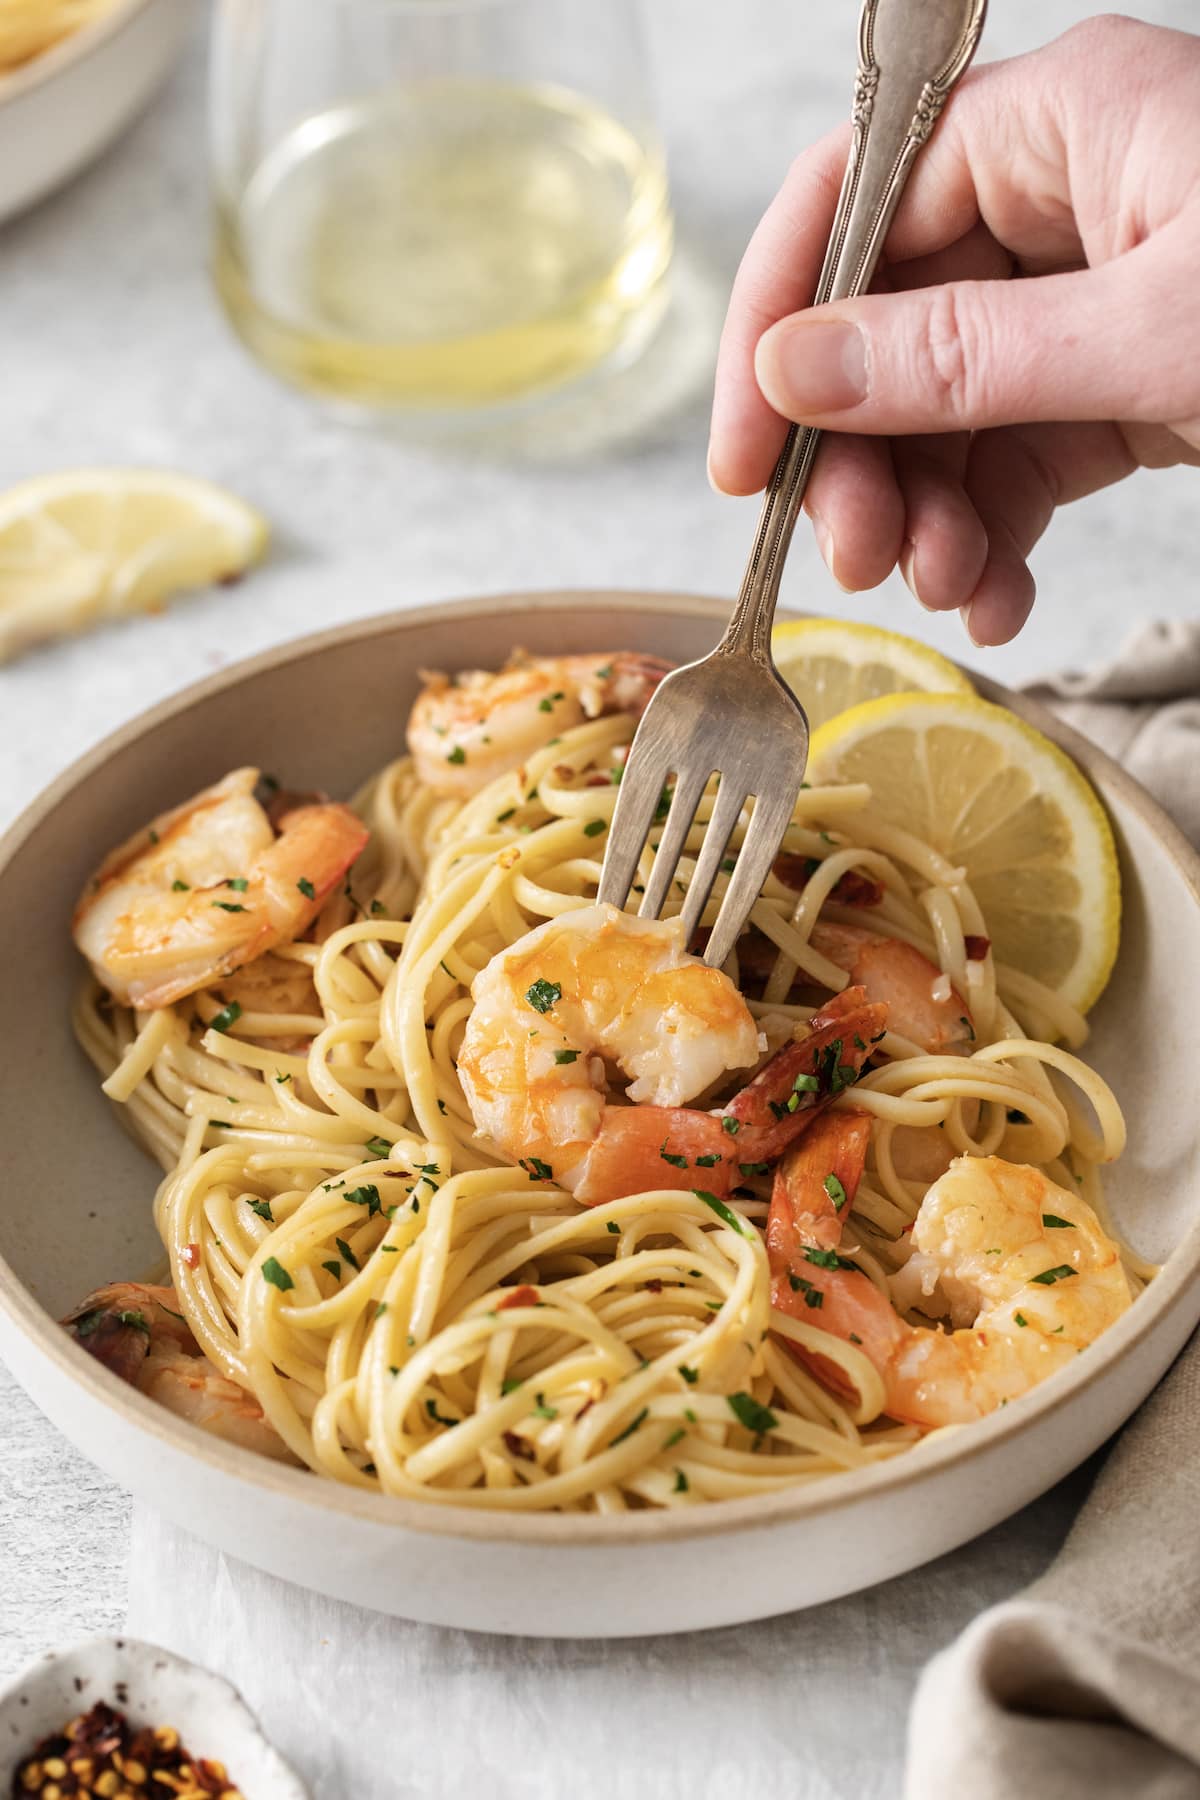 a hand holding a fork twirling shrimp pasta with linguine, red pepper flakes, herbs, and lemon slices in a bowl